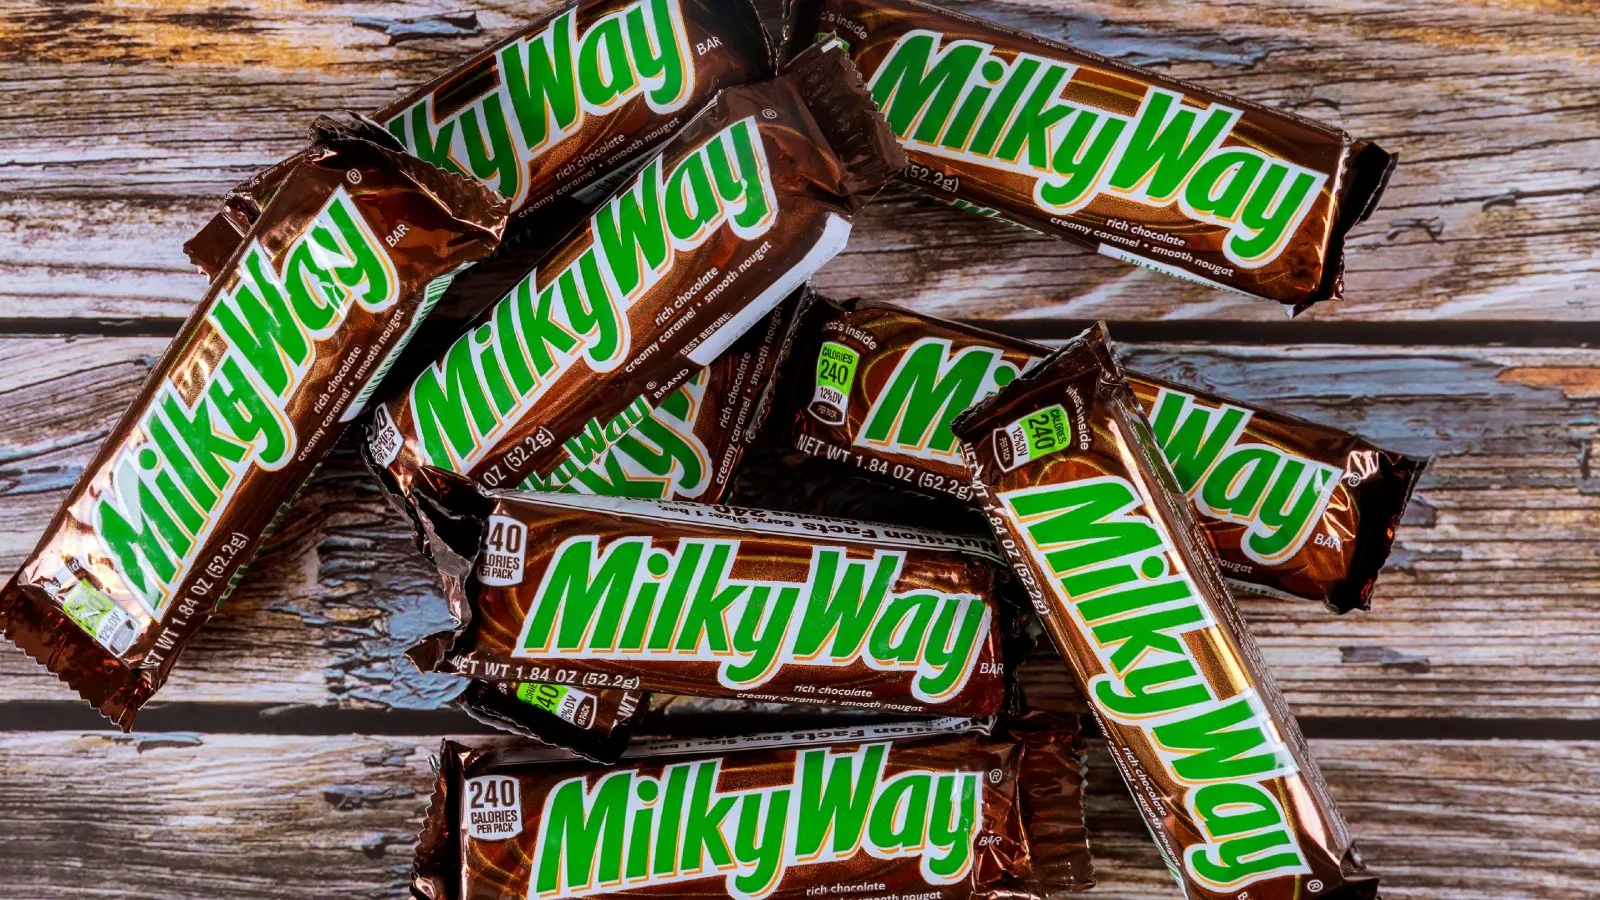 Mars candy bar labels don't have to disclose the bitter truth